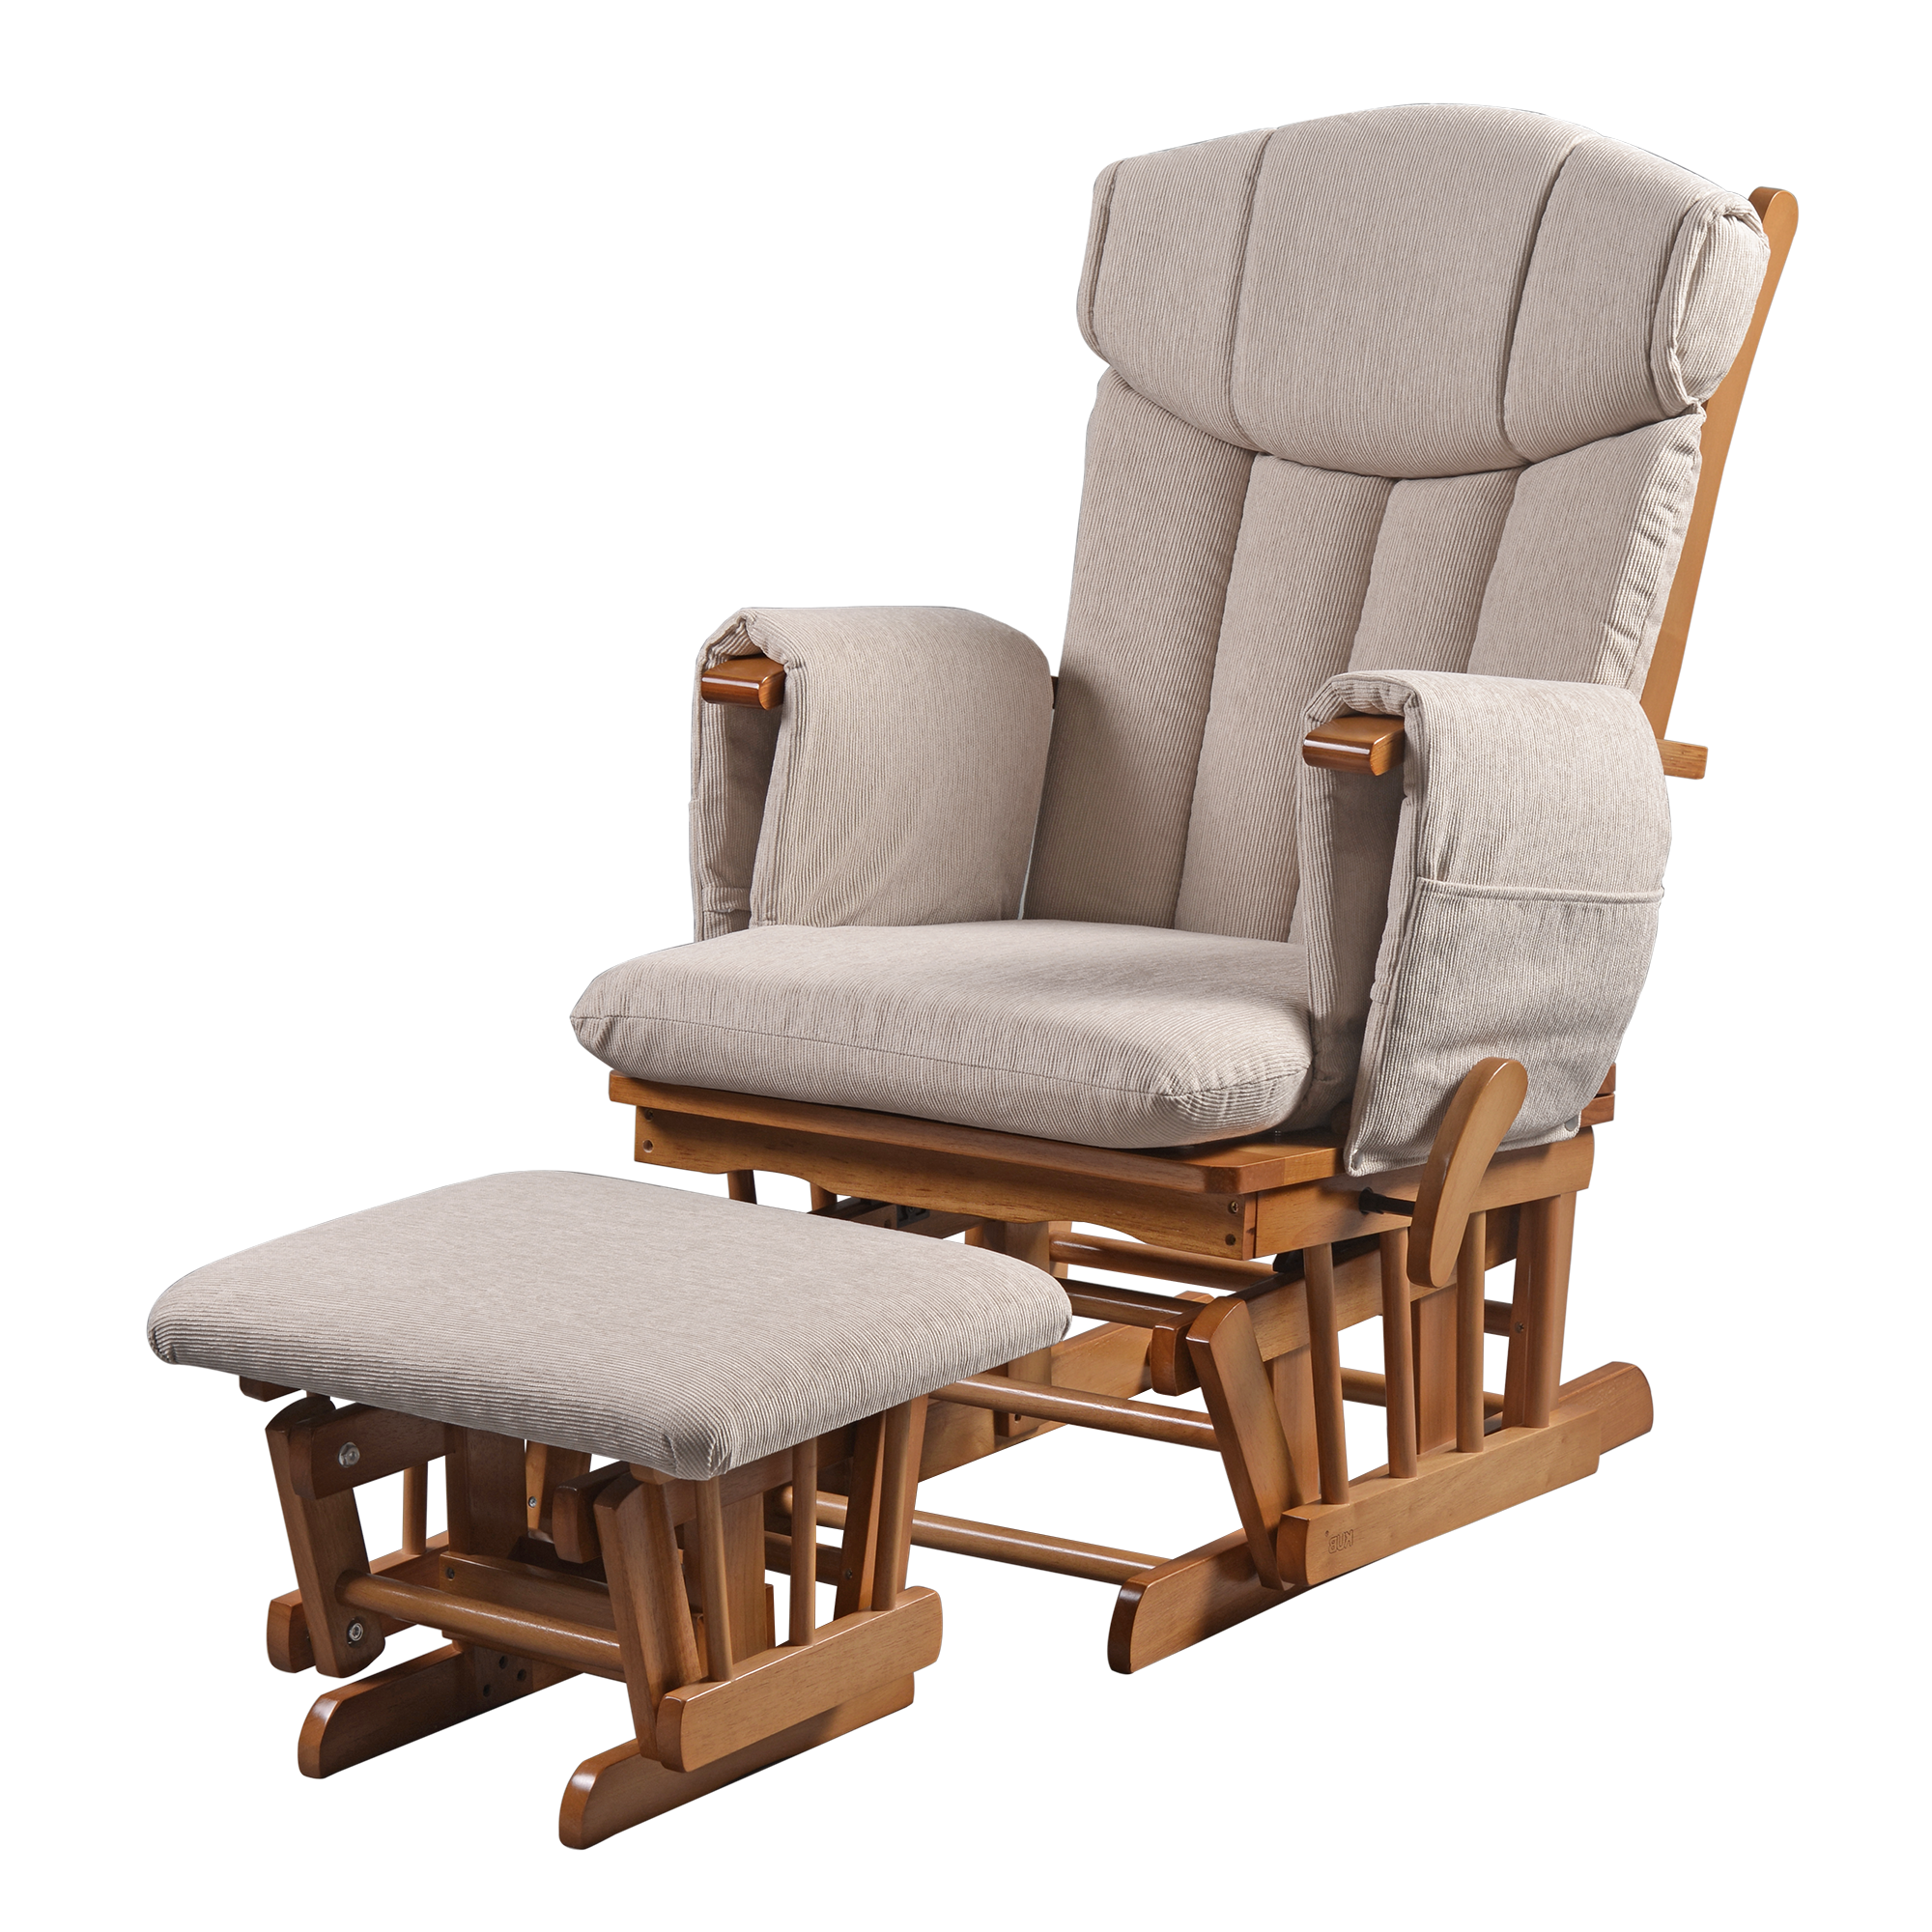 Chatsworth Nursing Chair and Footstool Cappuccino Dark- 50% OFF